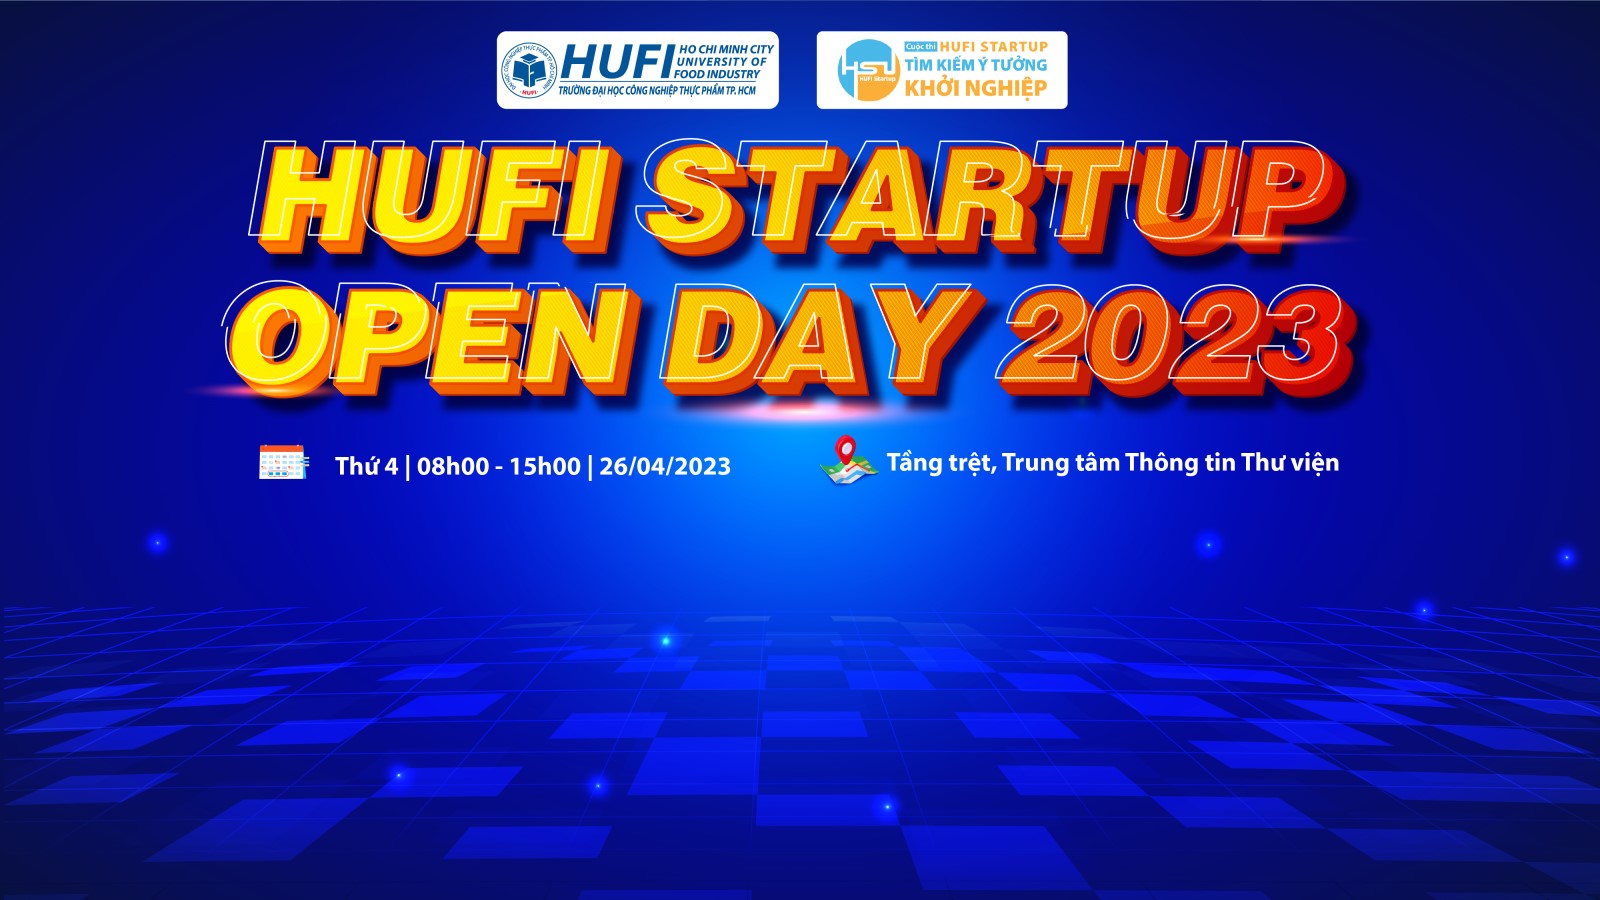 Ngày hội "HUFI Startup Open day 2023"